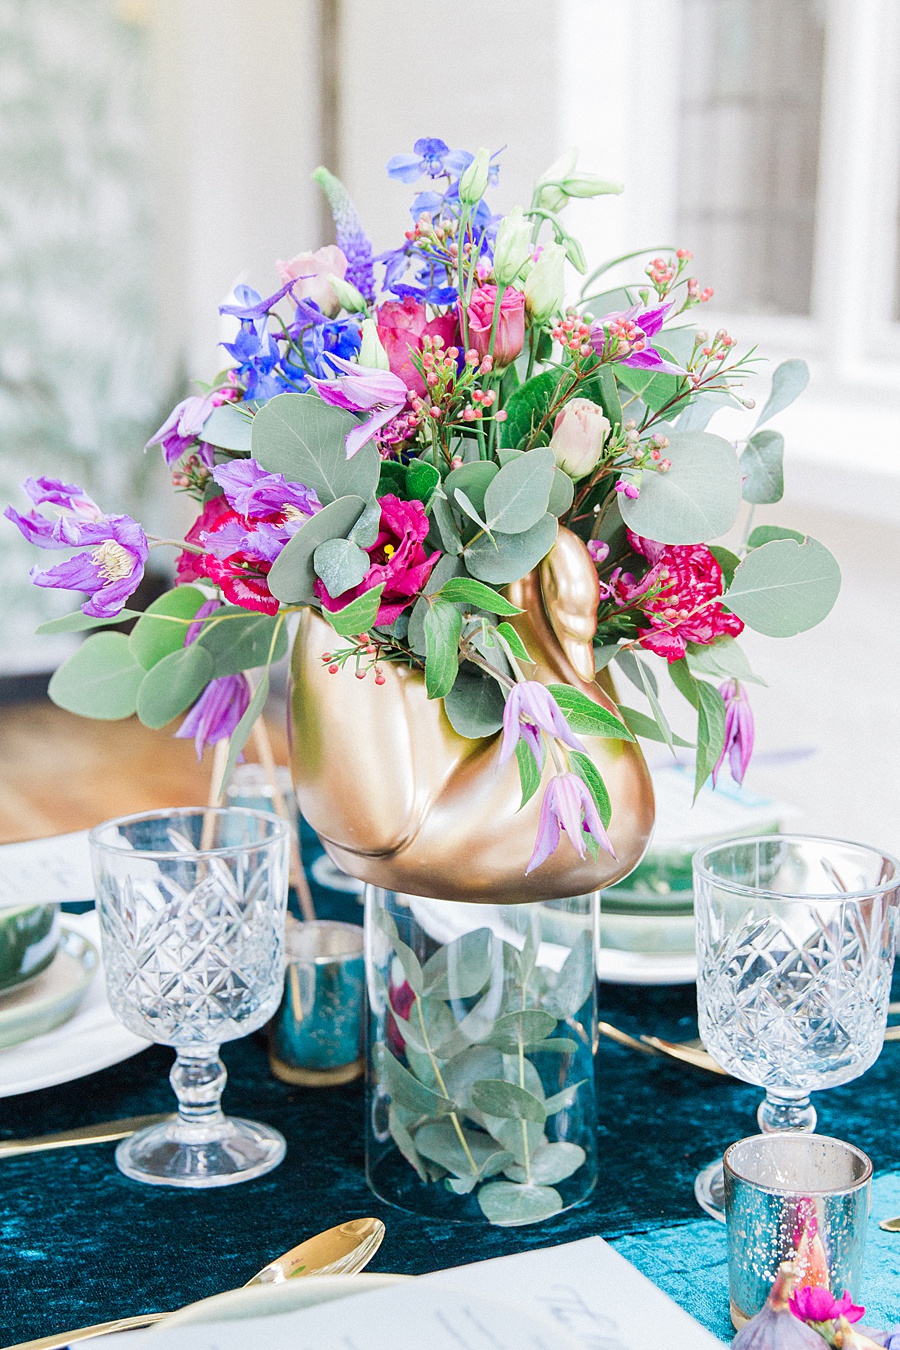 inspiration for a Greek wedding, photo credit Maxeen Kim Photography (36)